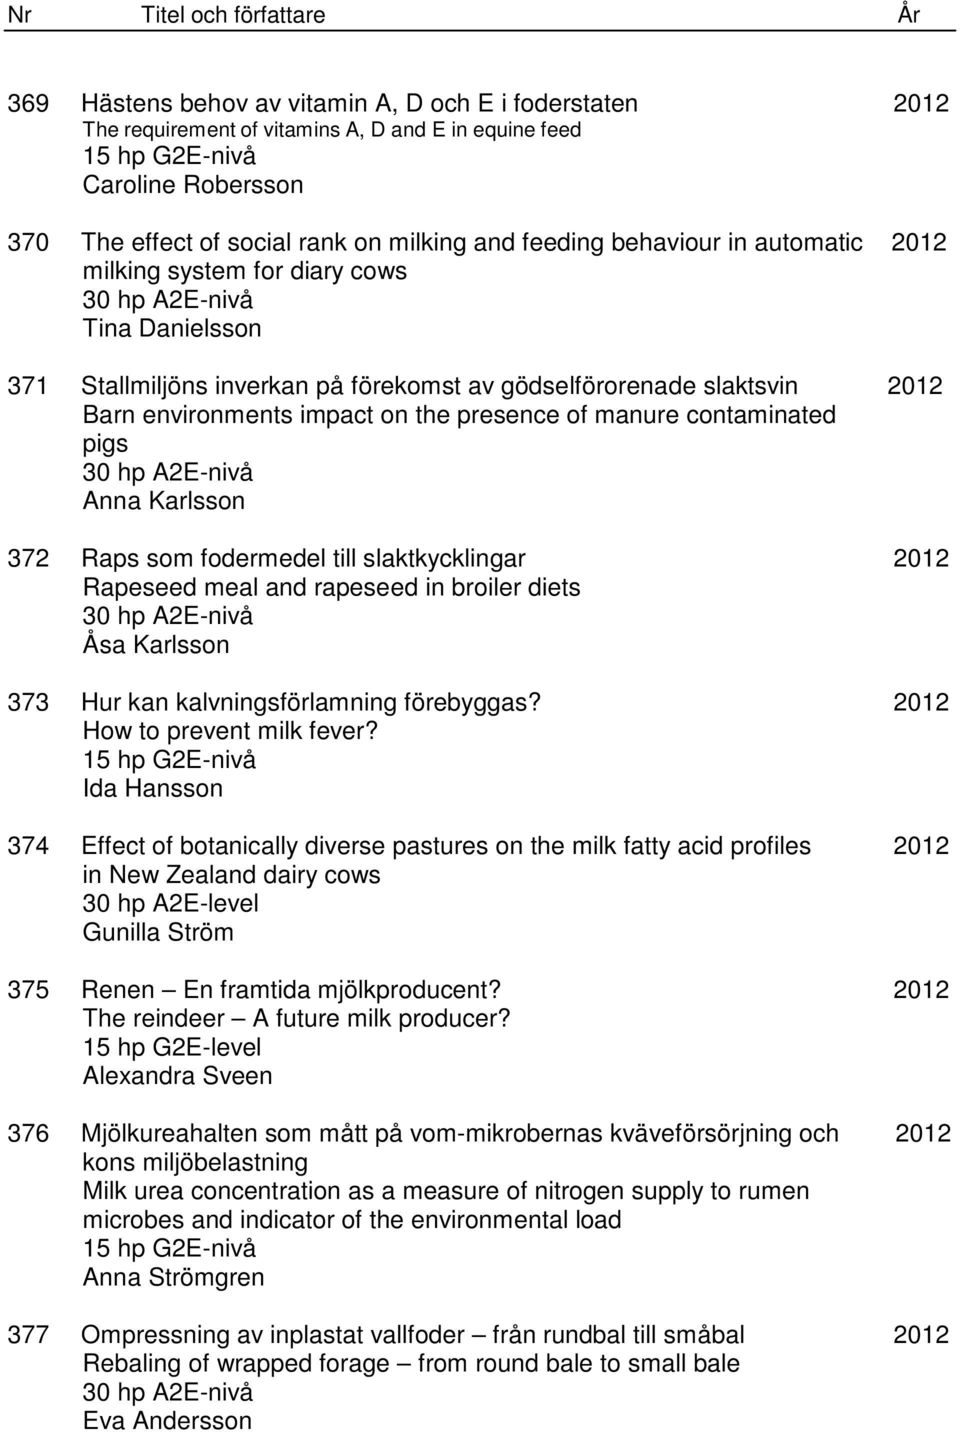 environments impact on the presence of manure contaminated pigs 30 hp A2E-nivå Anna Karlsson 372 Raps som fodermedel till slaktkycklingar 2012 Rapeseed meal and rapeseed in broiler diets 30 hp